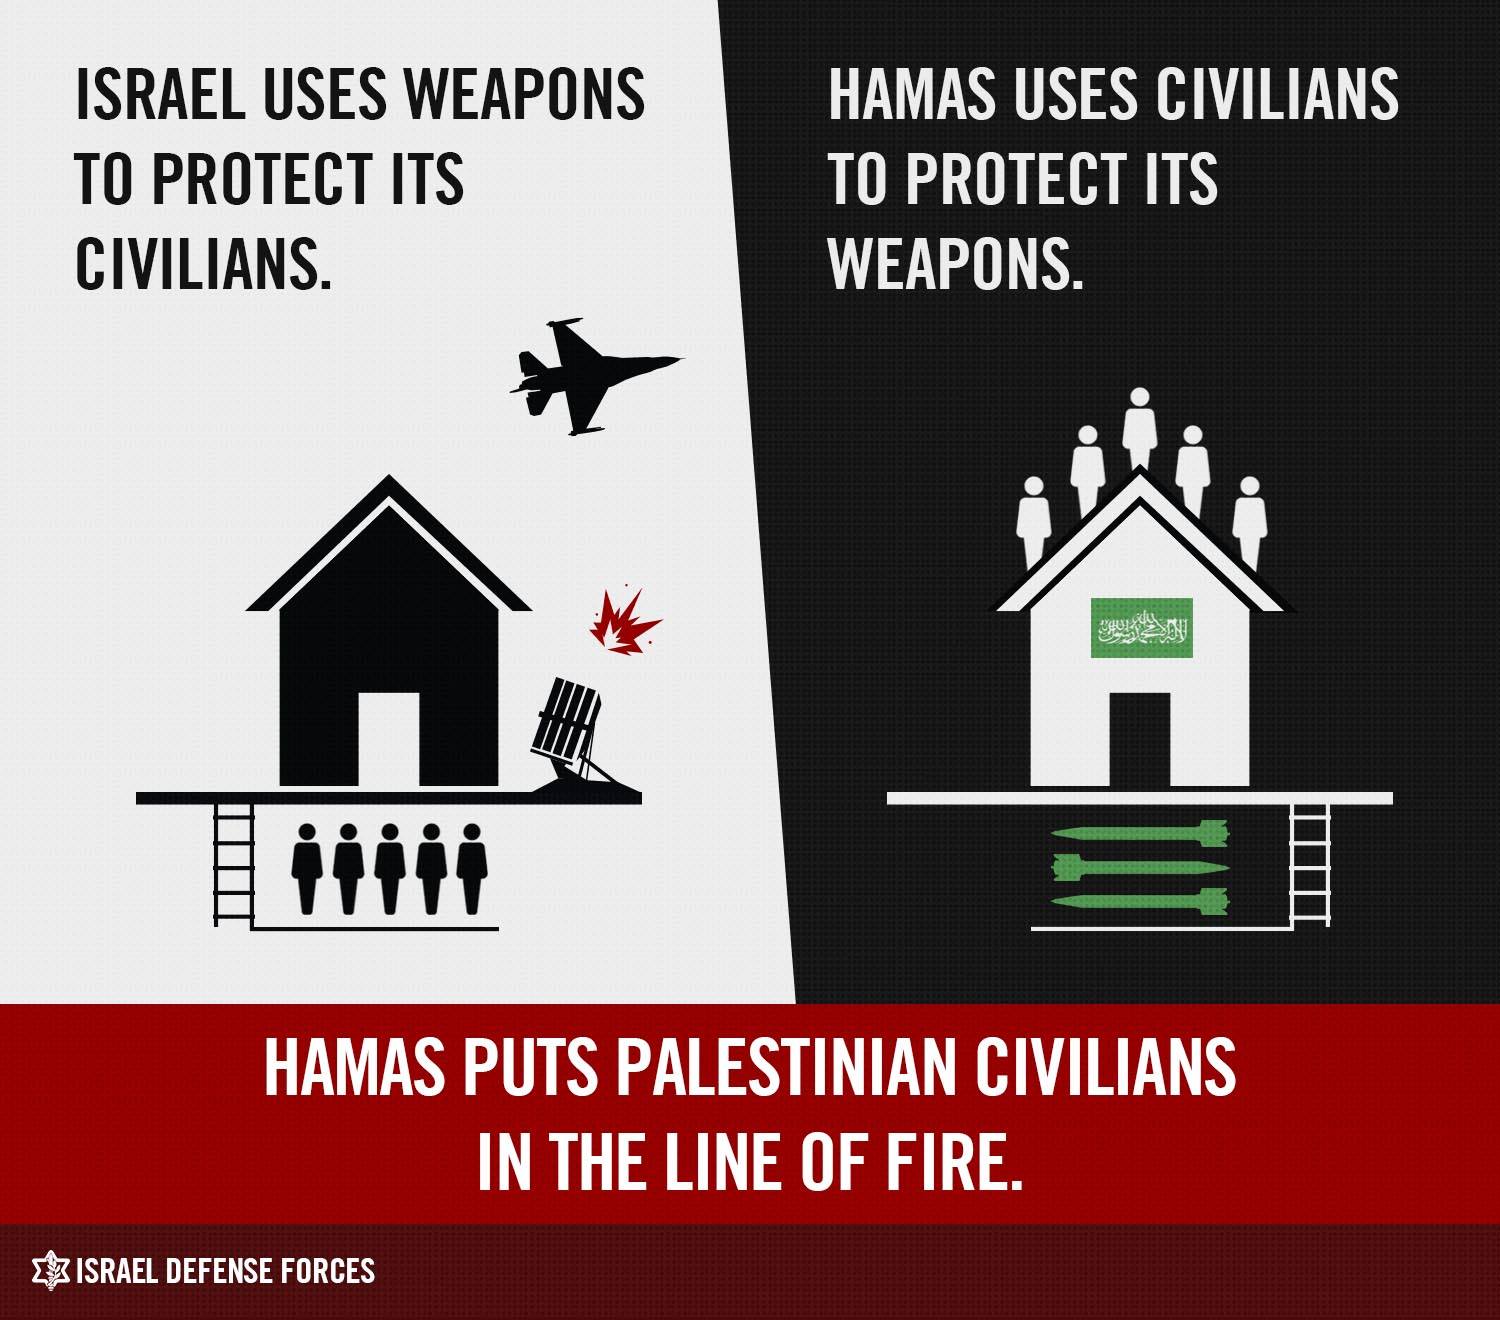 Israel and Hamas and their civilians